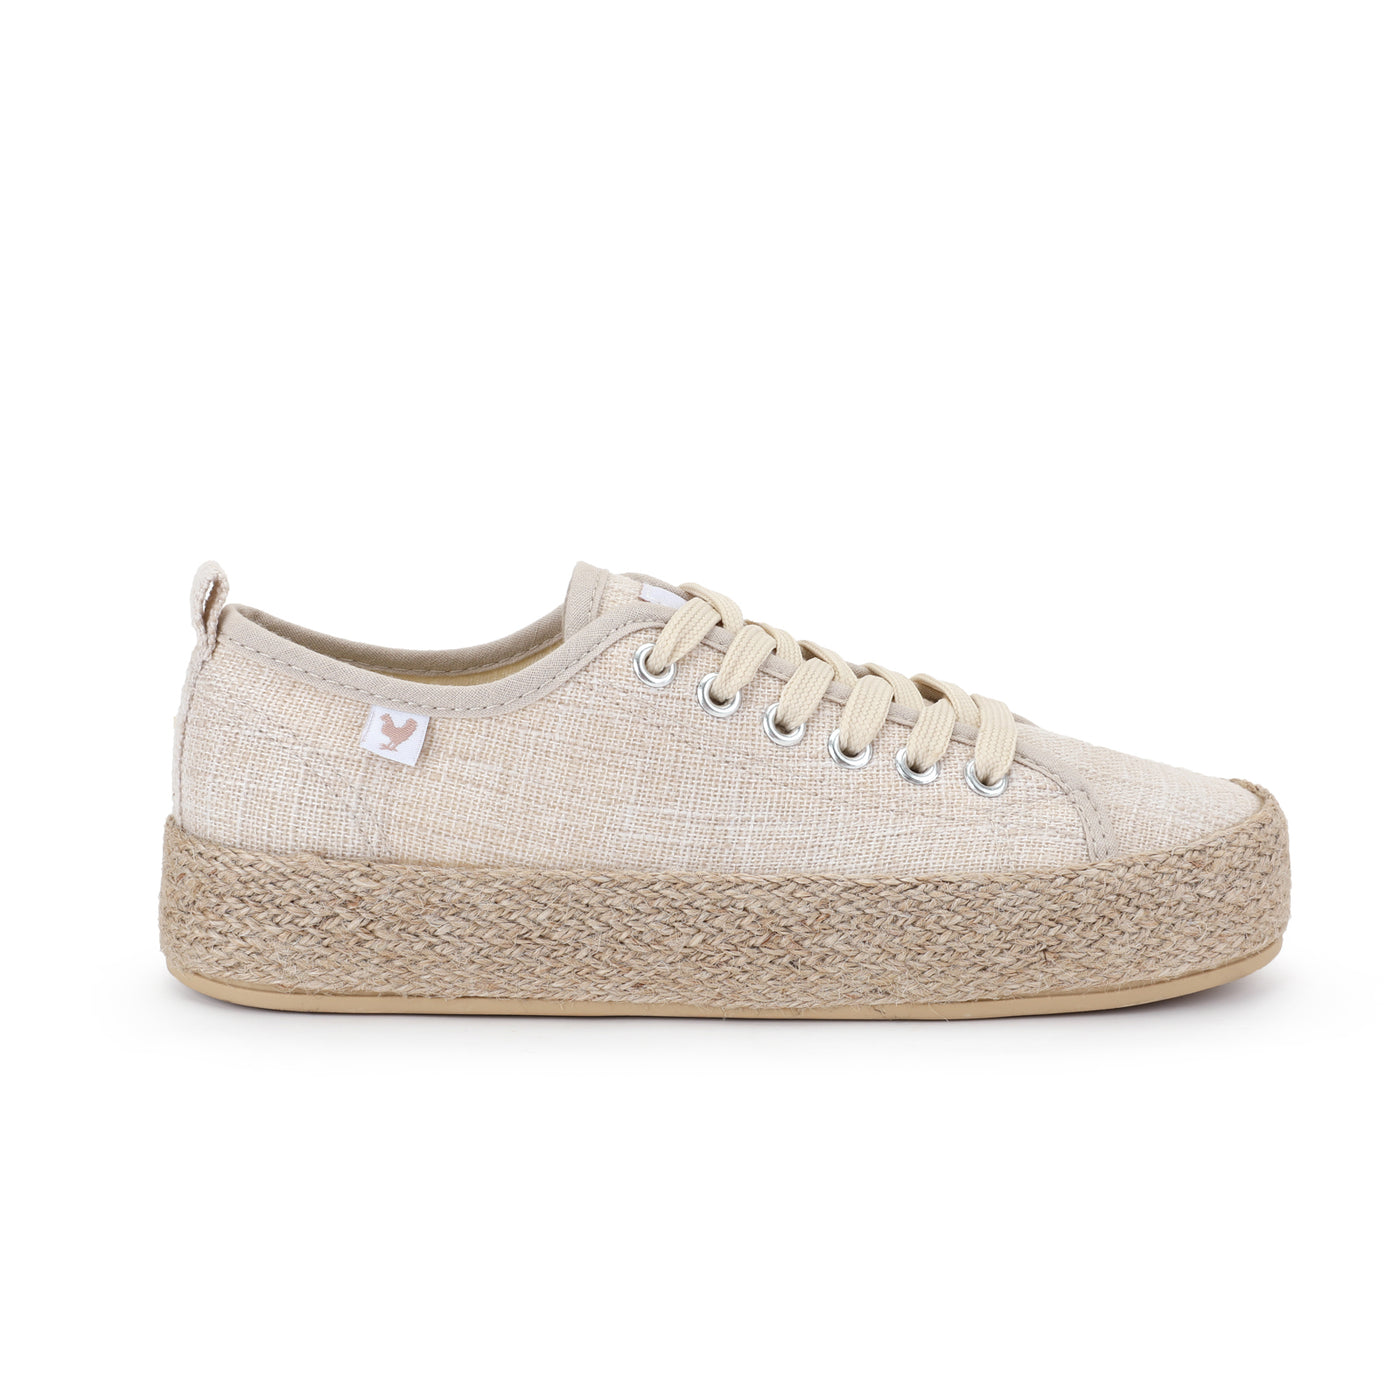 Pitas linen lace-up espadrille sneakers